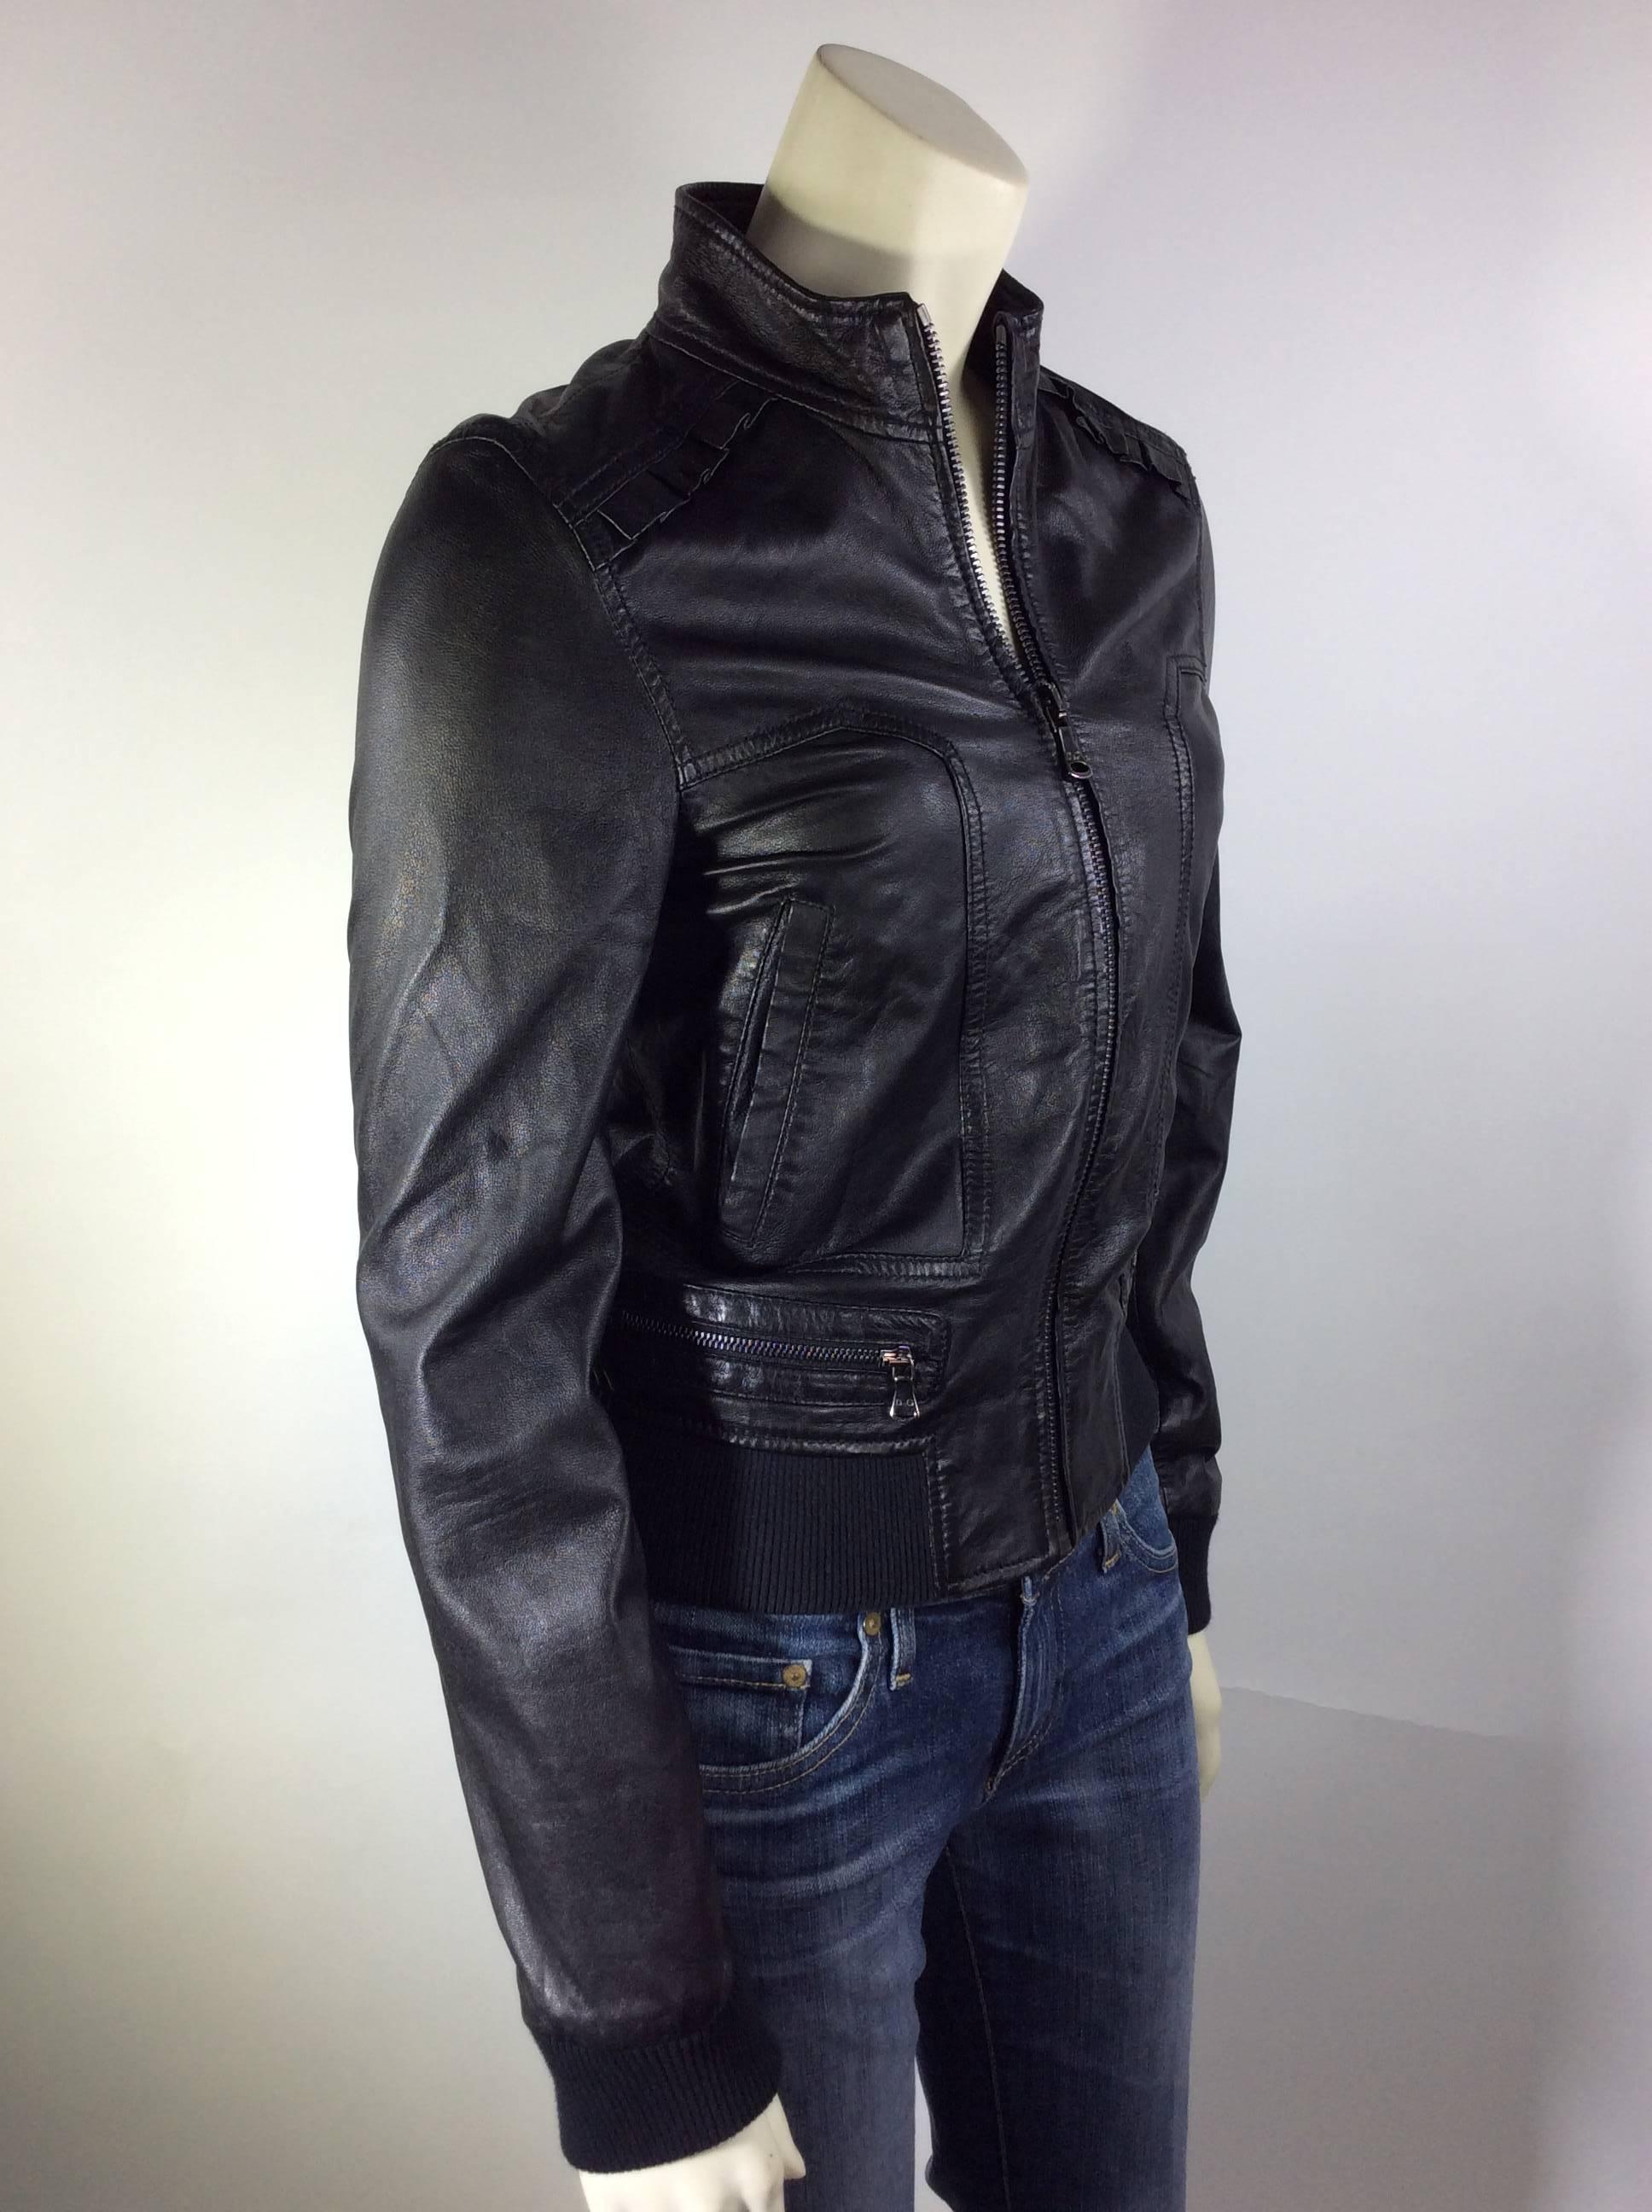 Black Leather Zip Up Motorcycle Jacket
Pockets on Either Side
Silvertone Zipper
Ruched Leather Detail on Shoulders and Back
100% Lambskin
UK Size 36 (Equates US 6)